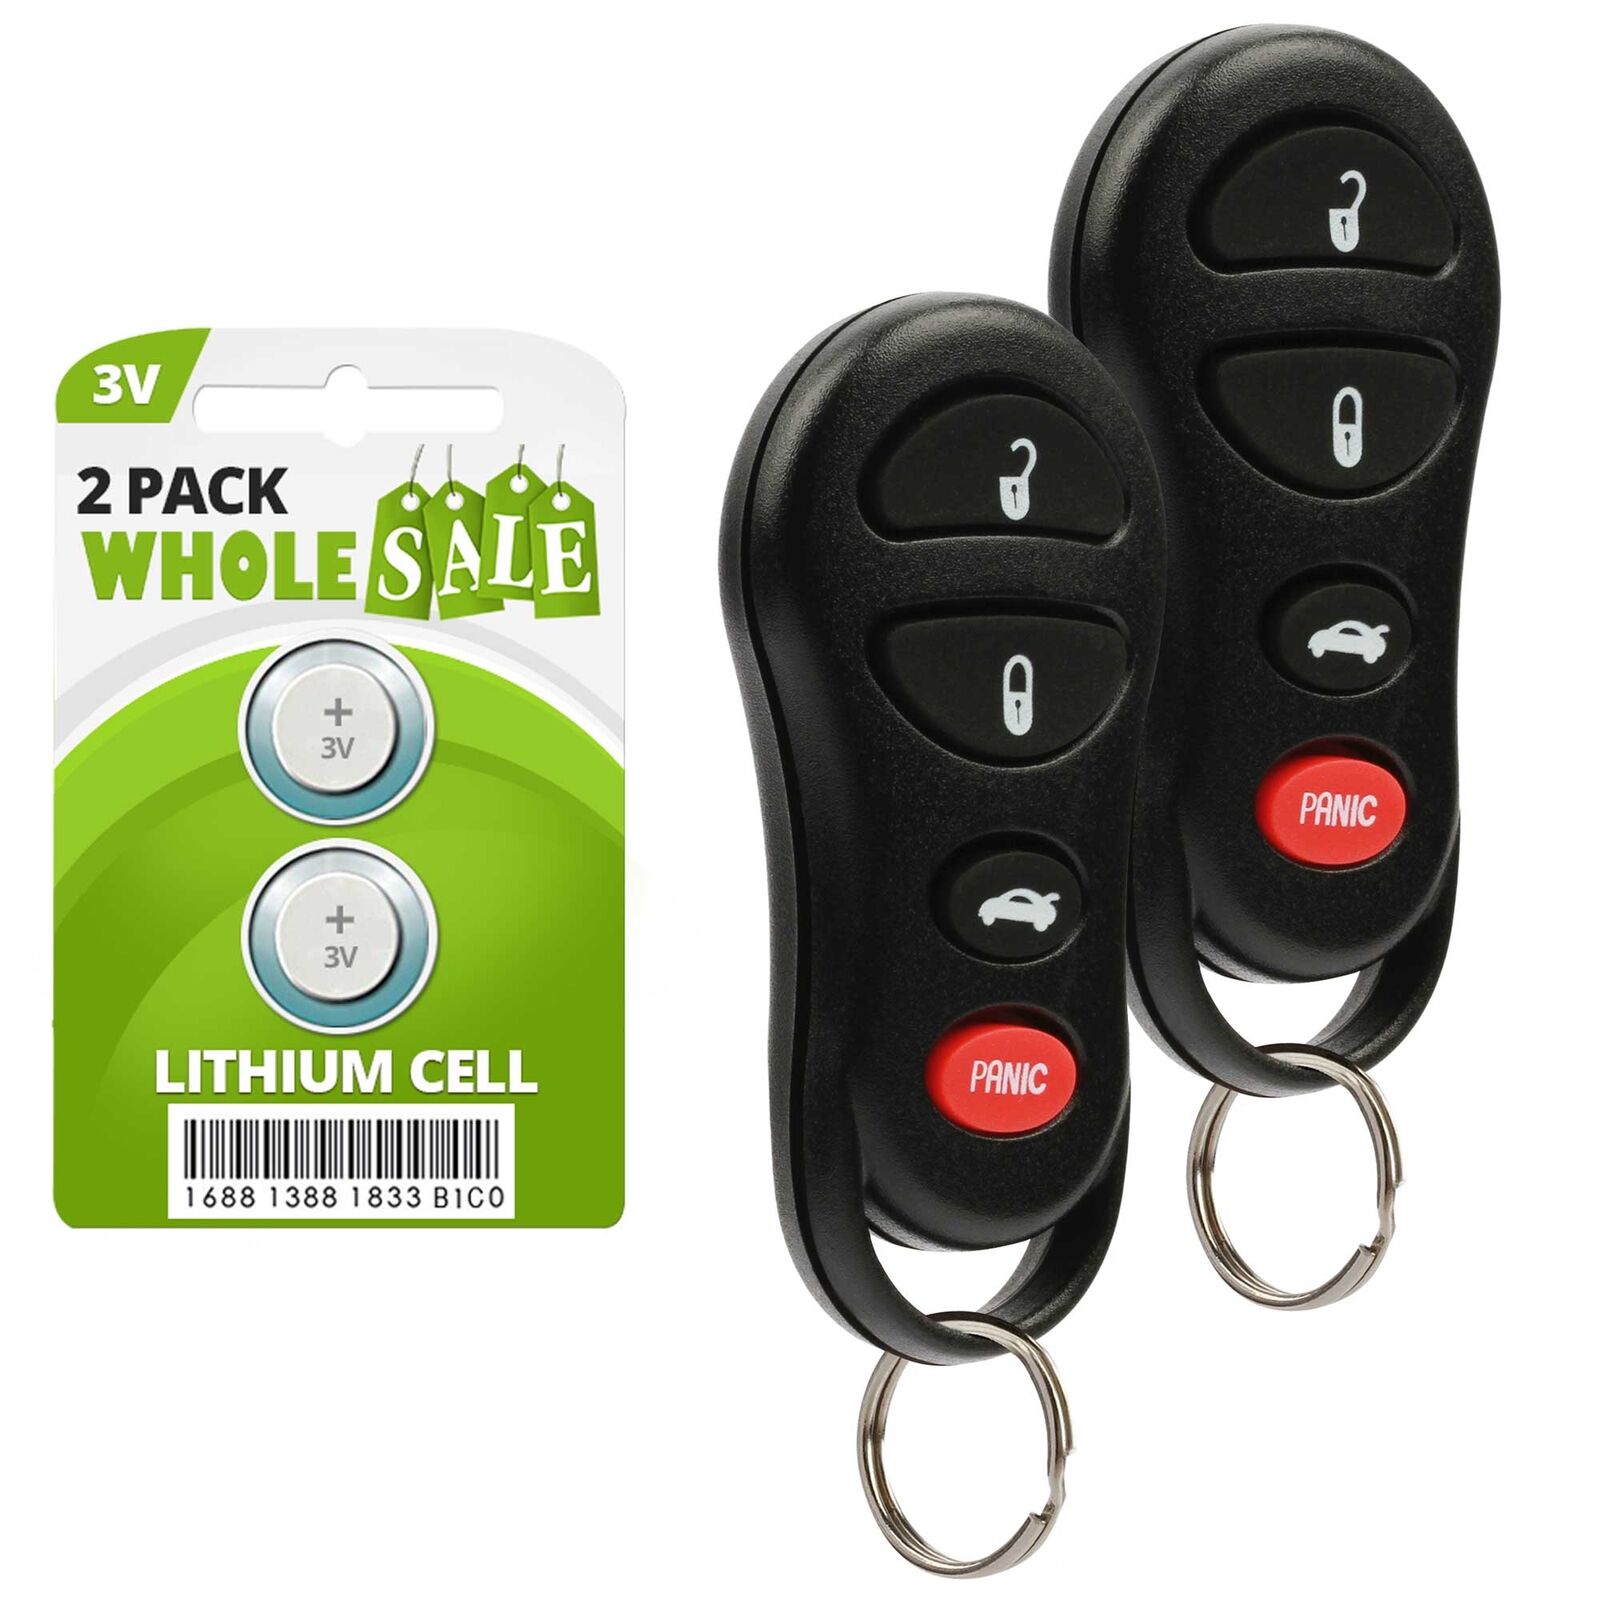 2 Replacement For 2001 2002 2003 2004 2005 2006 Chrysler Sebring Key Fob Remote